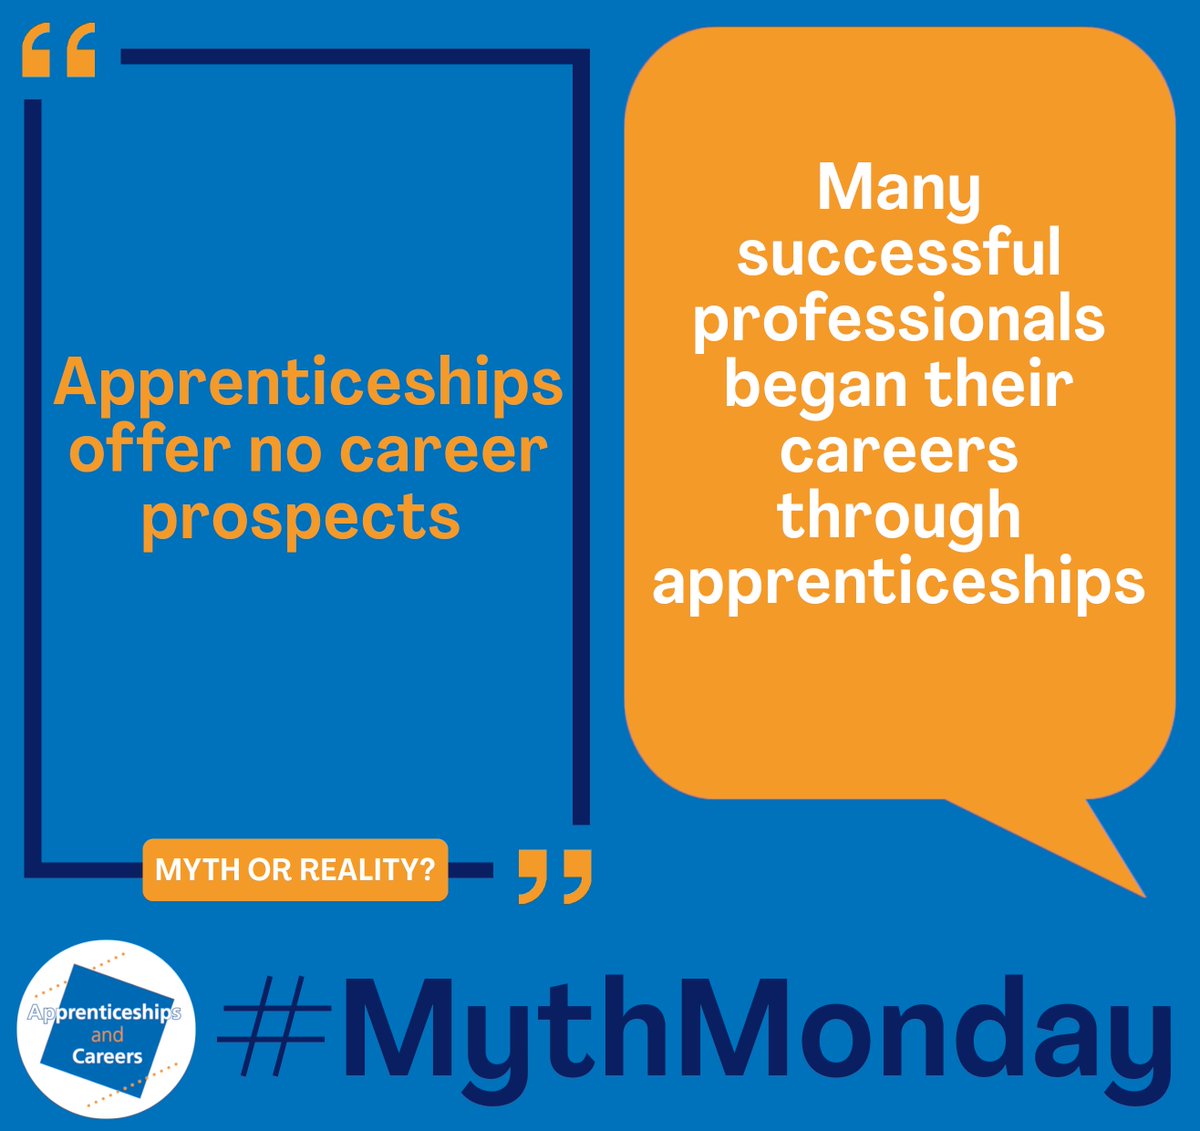 Dispelling some more #myths around #apprenticeships.

#MythMonday

#CareersDay #CareersFamily #SkillsforLife #StepintotheNHS #CareersDay #CareersFamily